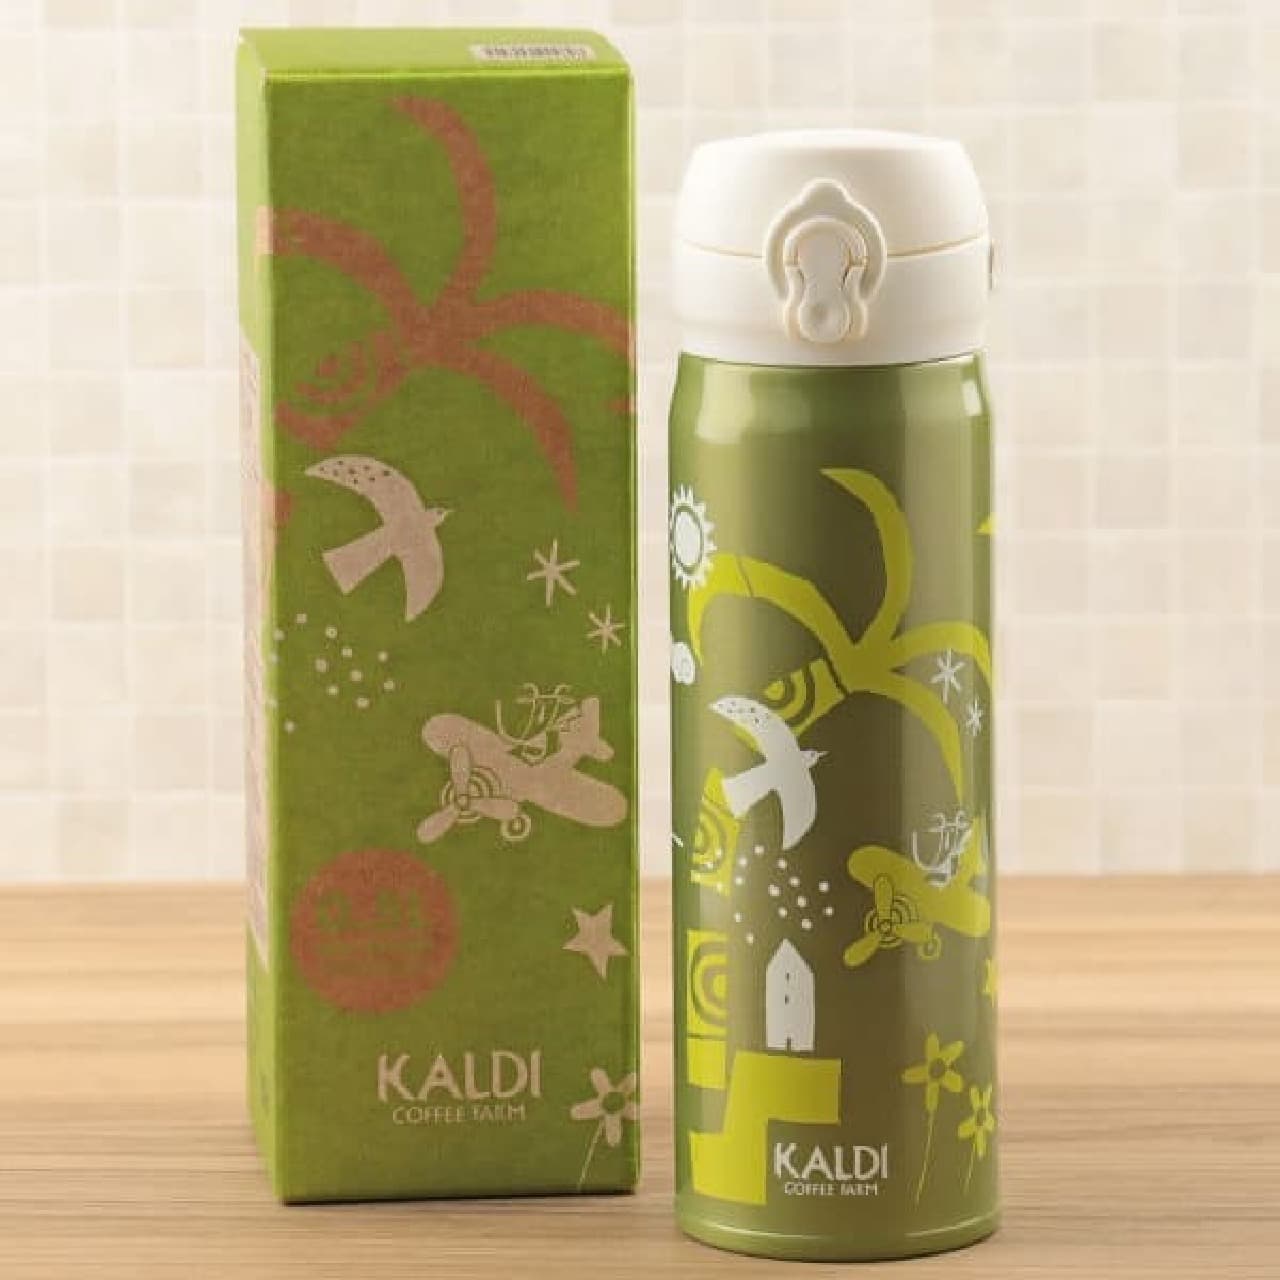 Thermos "stainless steel bottle" in KALDI